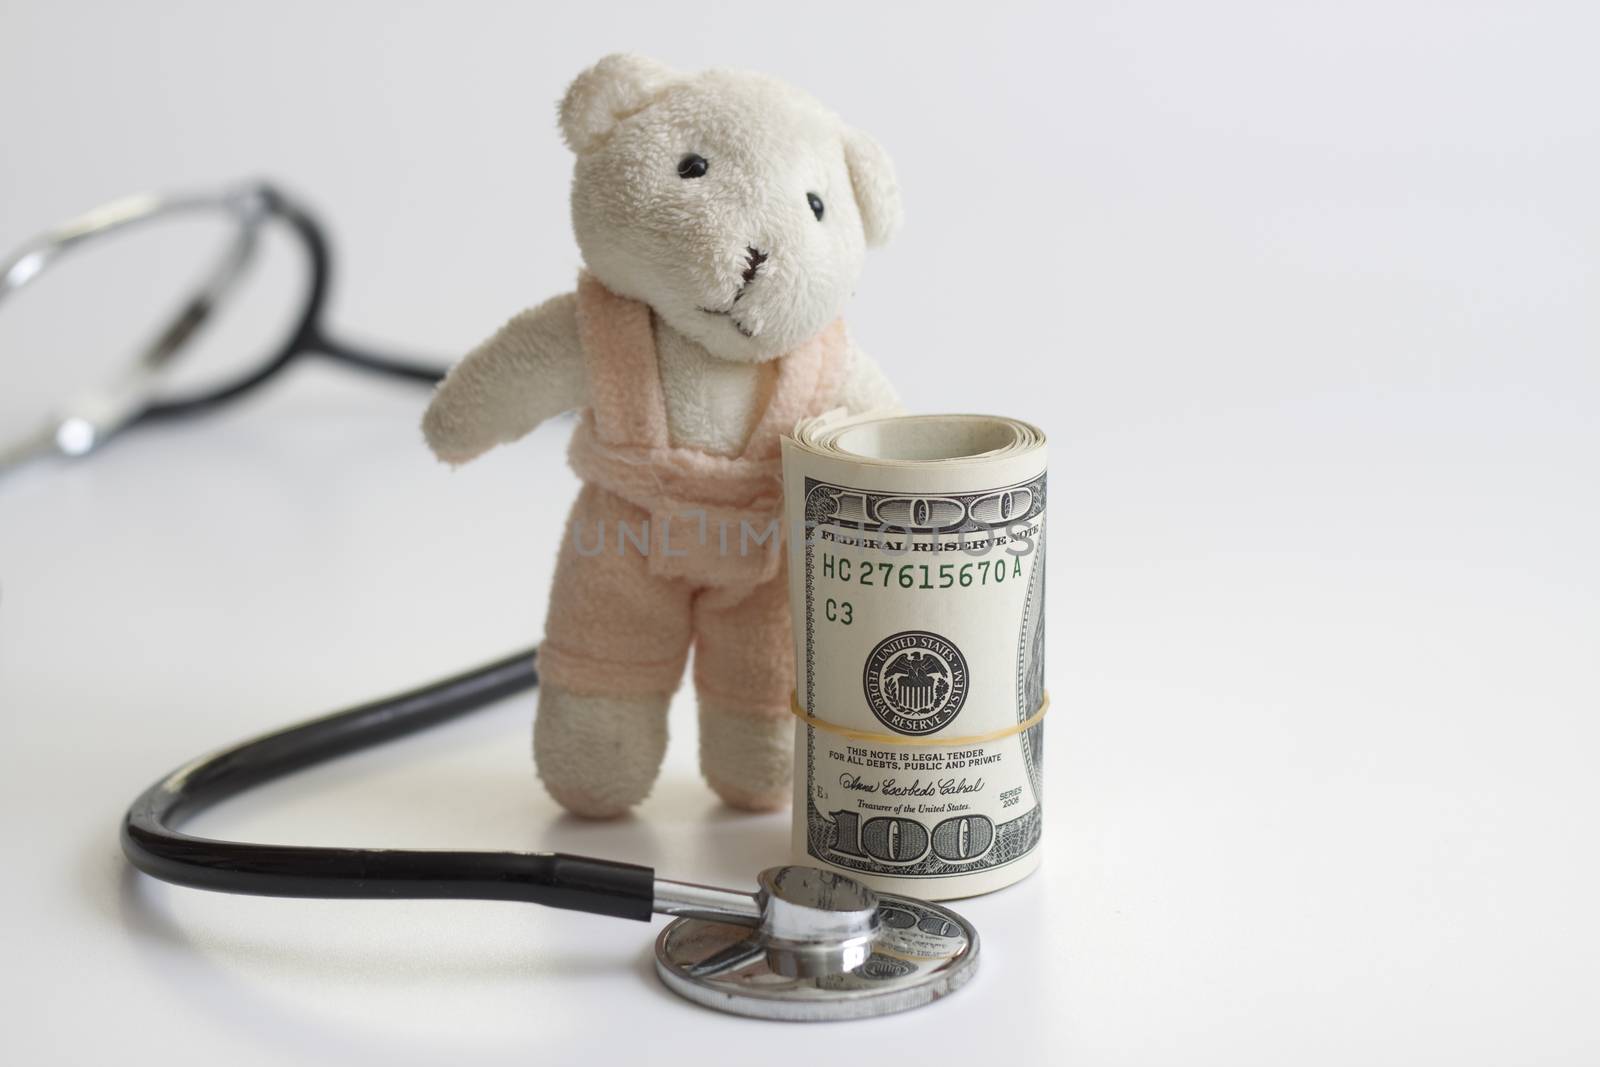 a stack of dollars  a stethoscope and a teddy bear the health insurance future